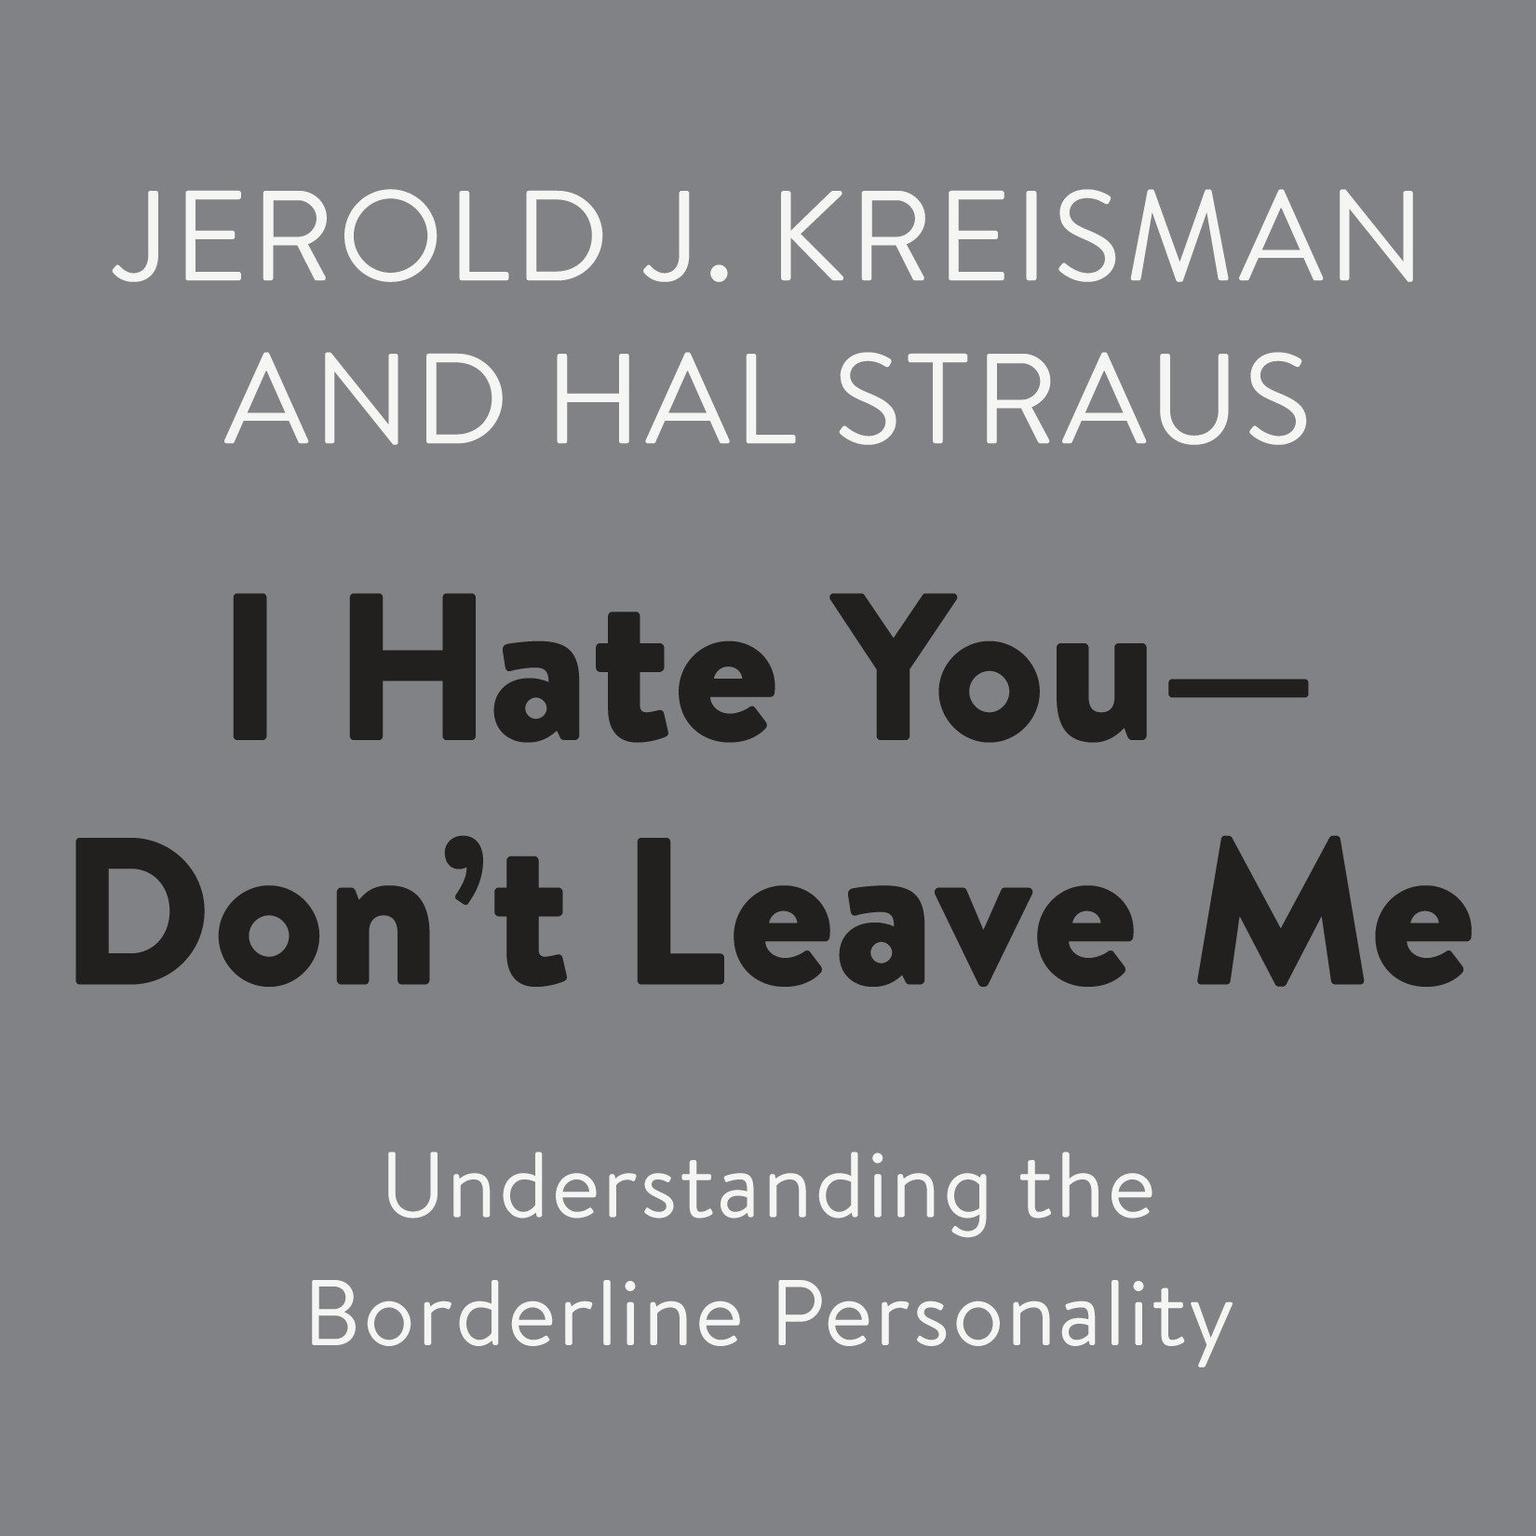 I Hate You--Dont Leave Me: Understanding the Borderline Personality Audiobook, by Jerold J. Kreisman